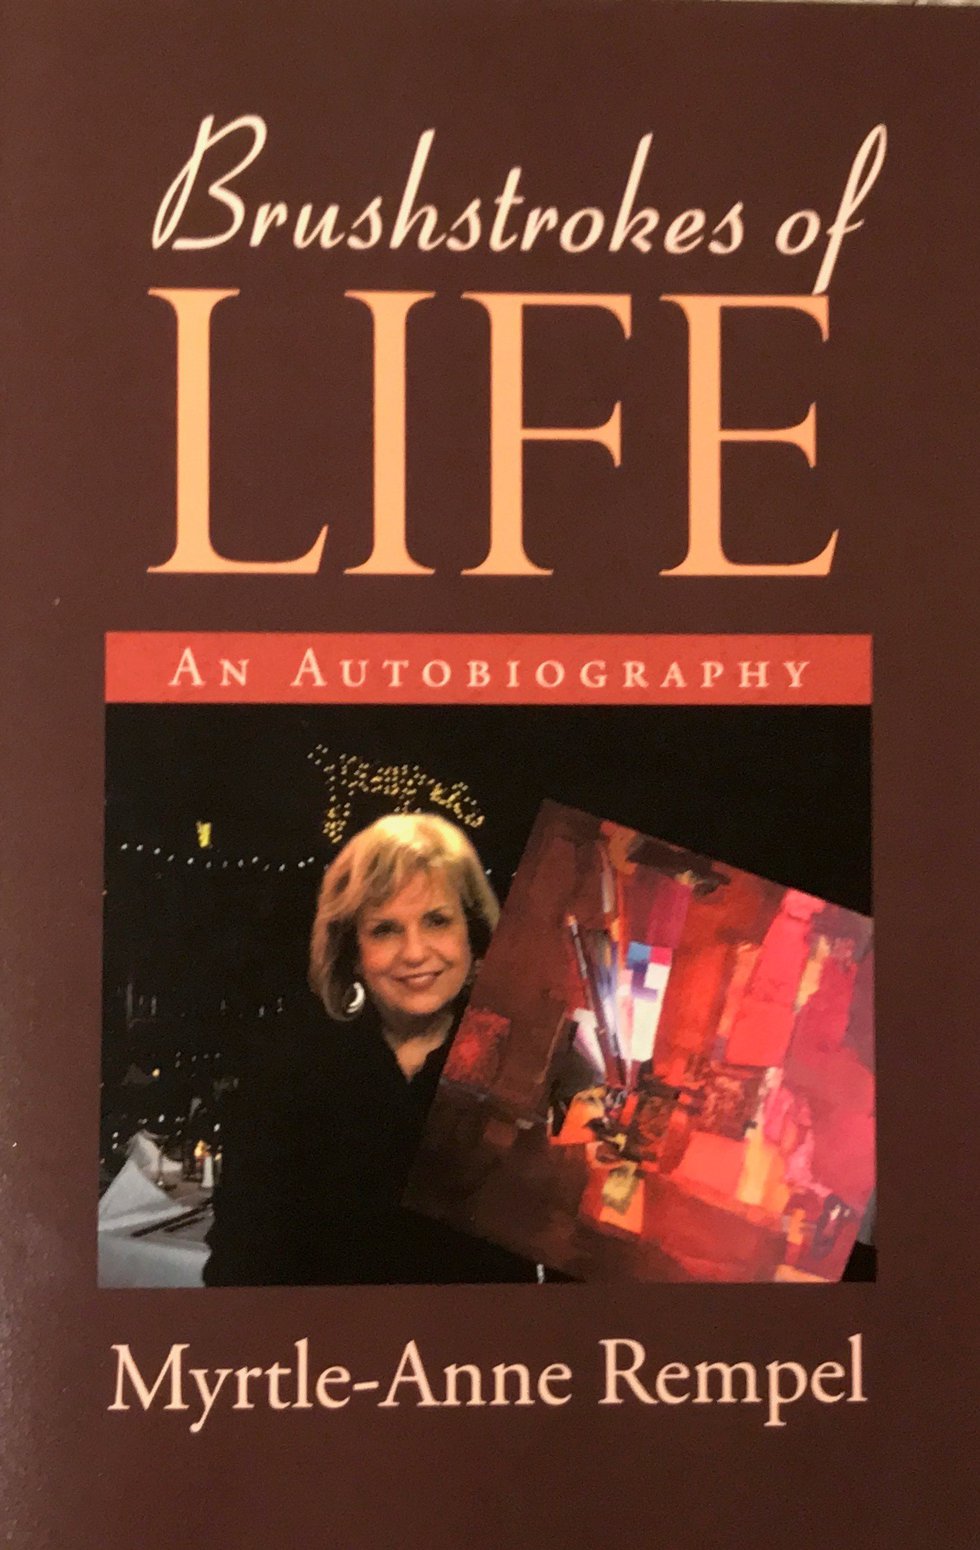 Myrtle-Anne Rempel, "Brushstrokes of Life – An Autobiography," 2018